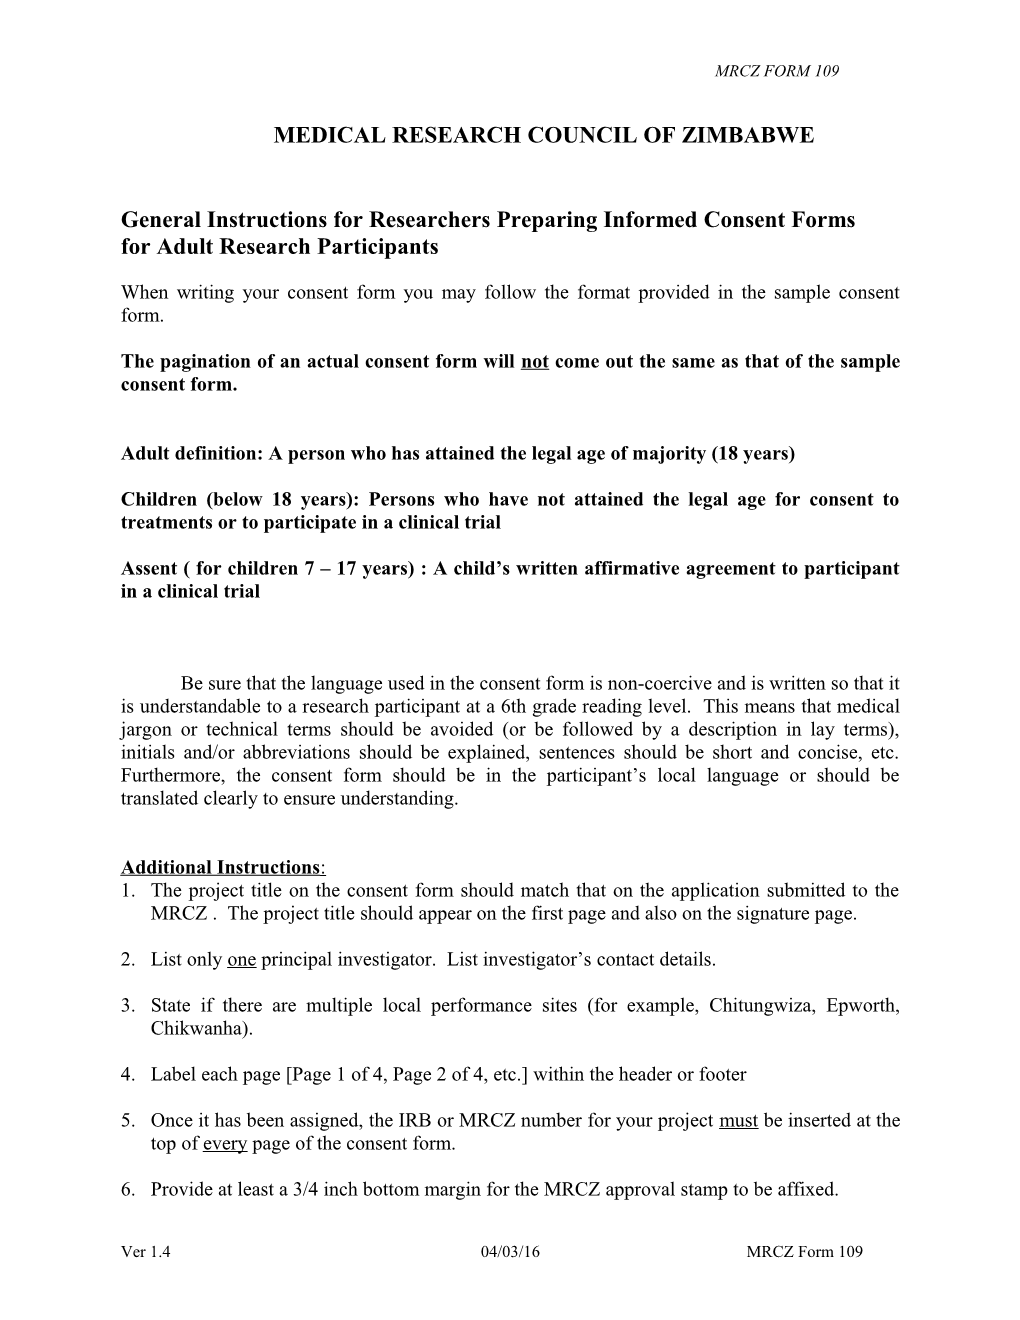 General Instructions for Researchers Preparing Informed Consent Forms